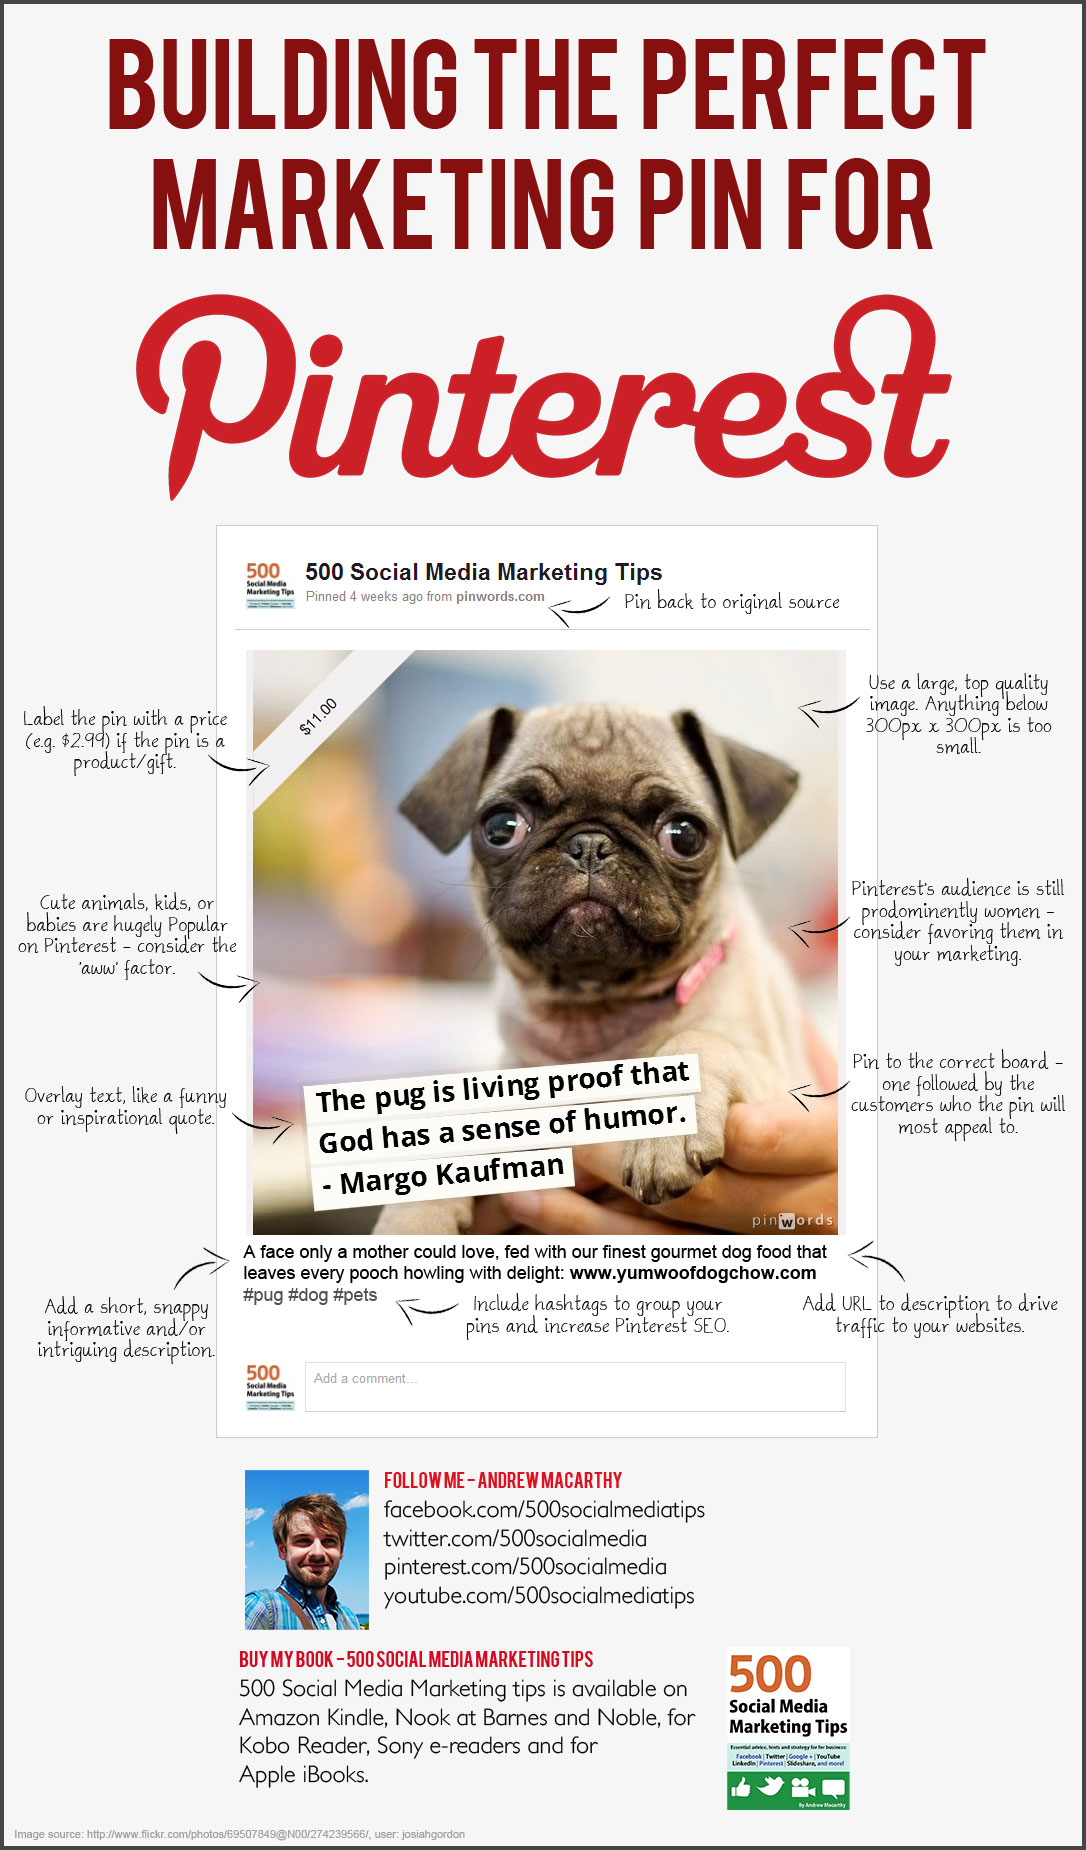 Creating Perfect Marketing Pins For Pinterest [Infographic]